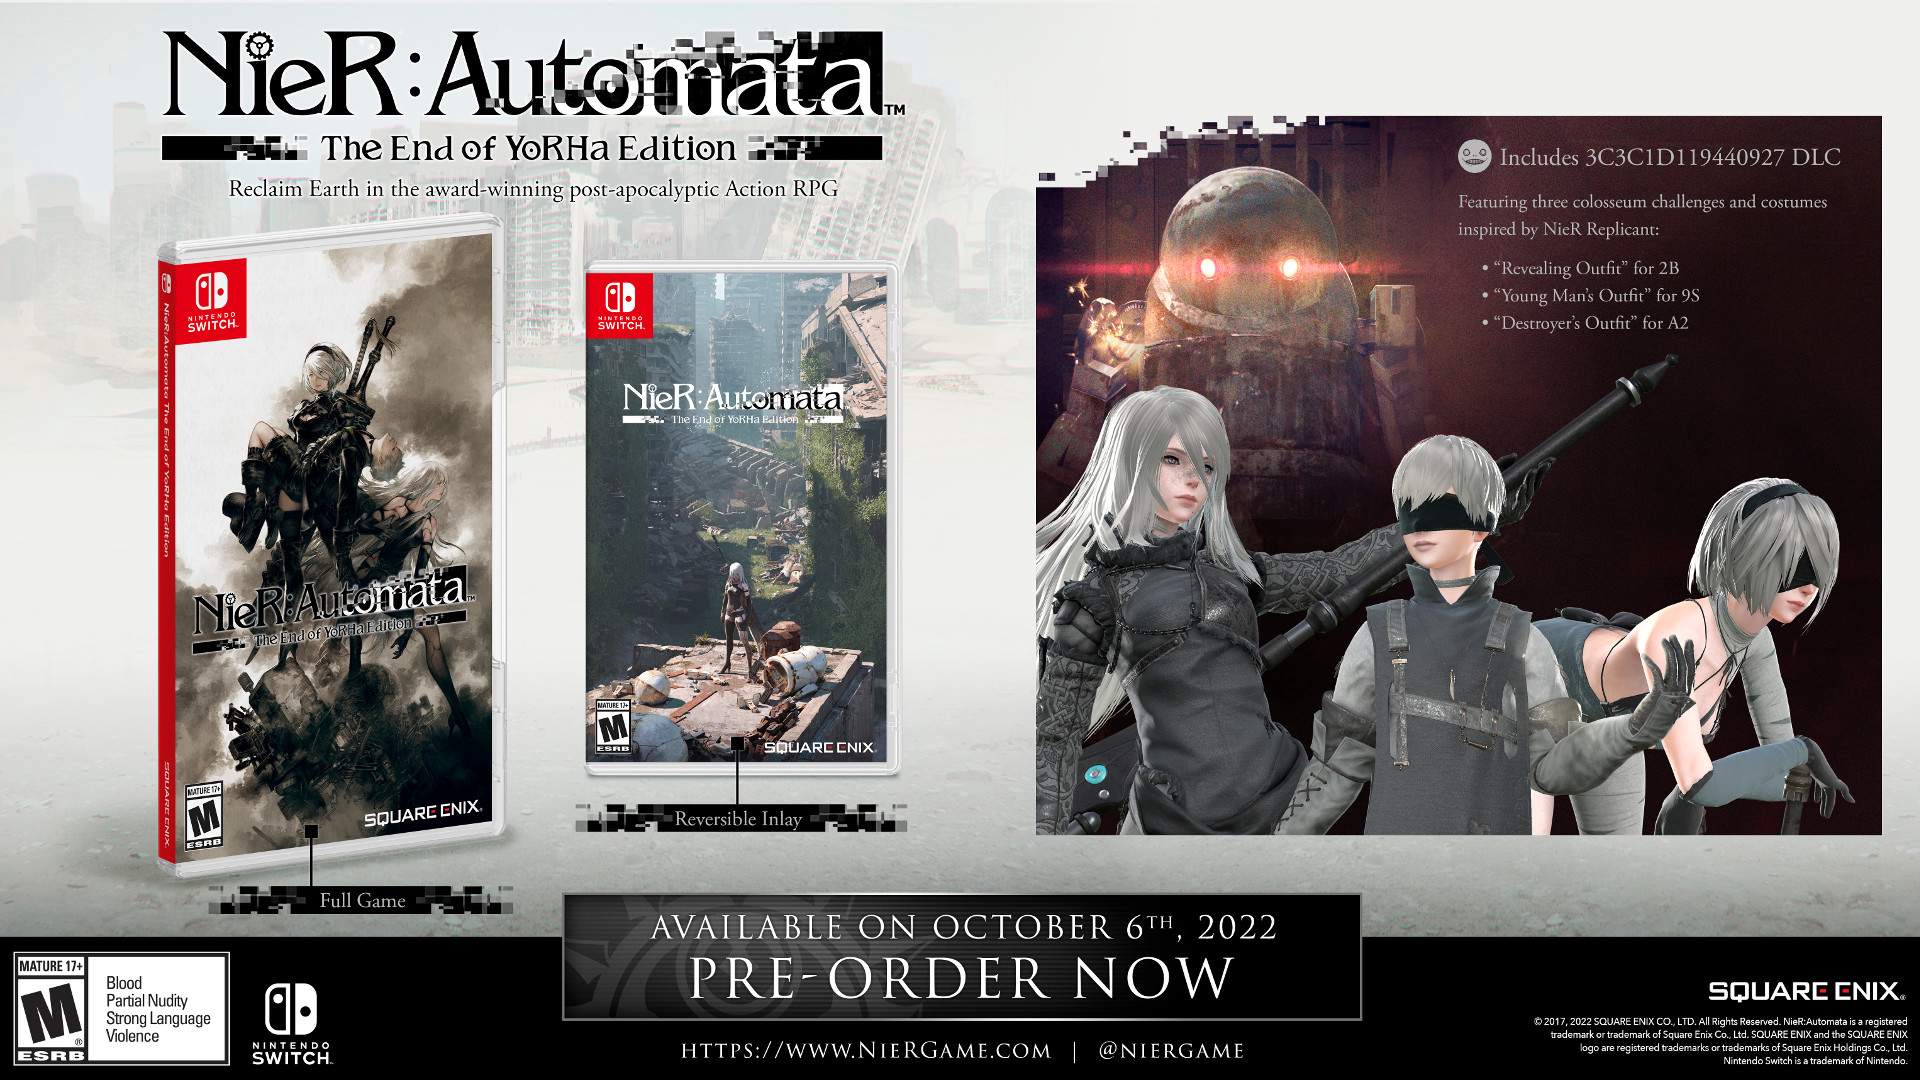 NieR: Automata coming to Switch